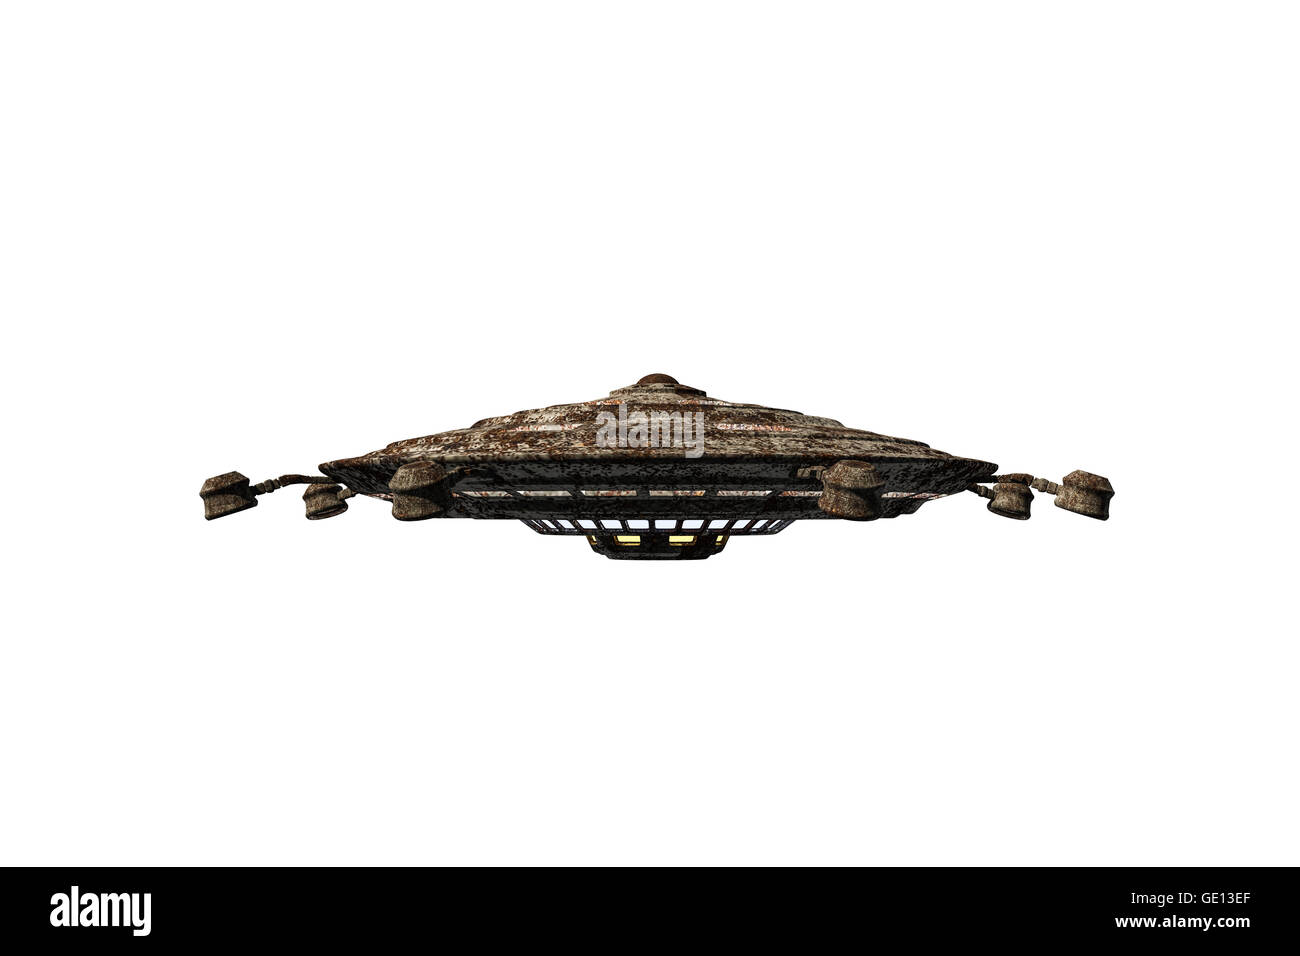 3d illustration of a rusty spaceship isolated on white background Stock Photo